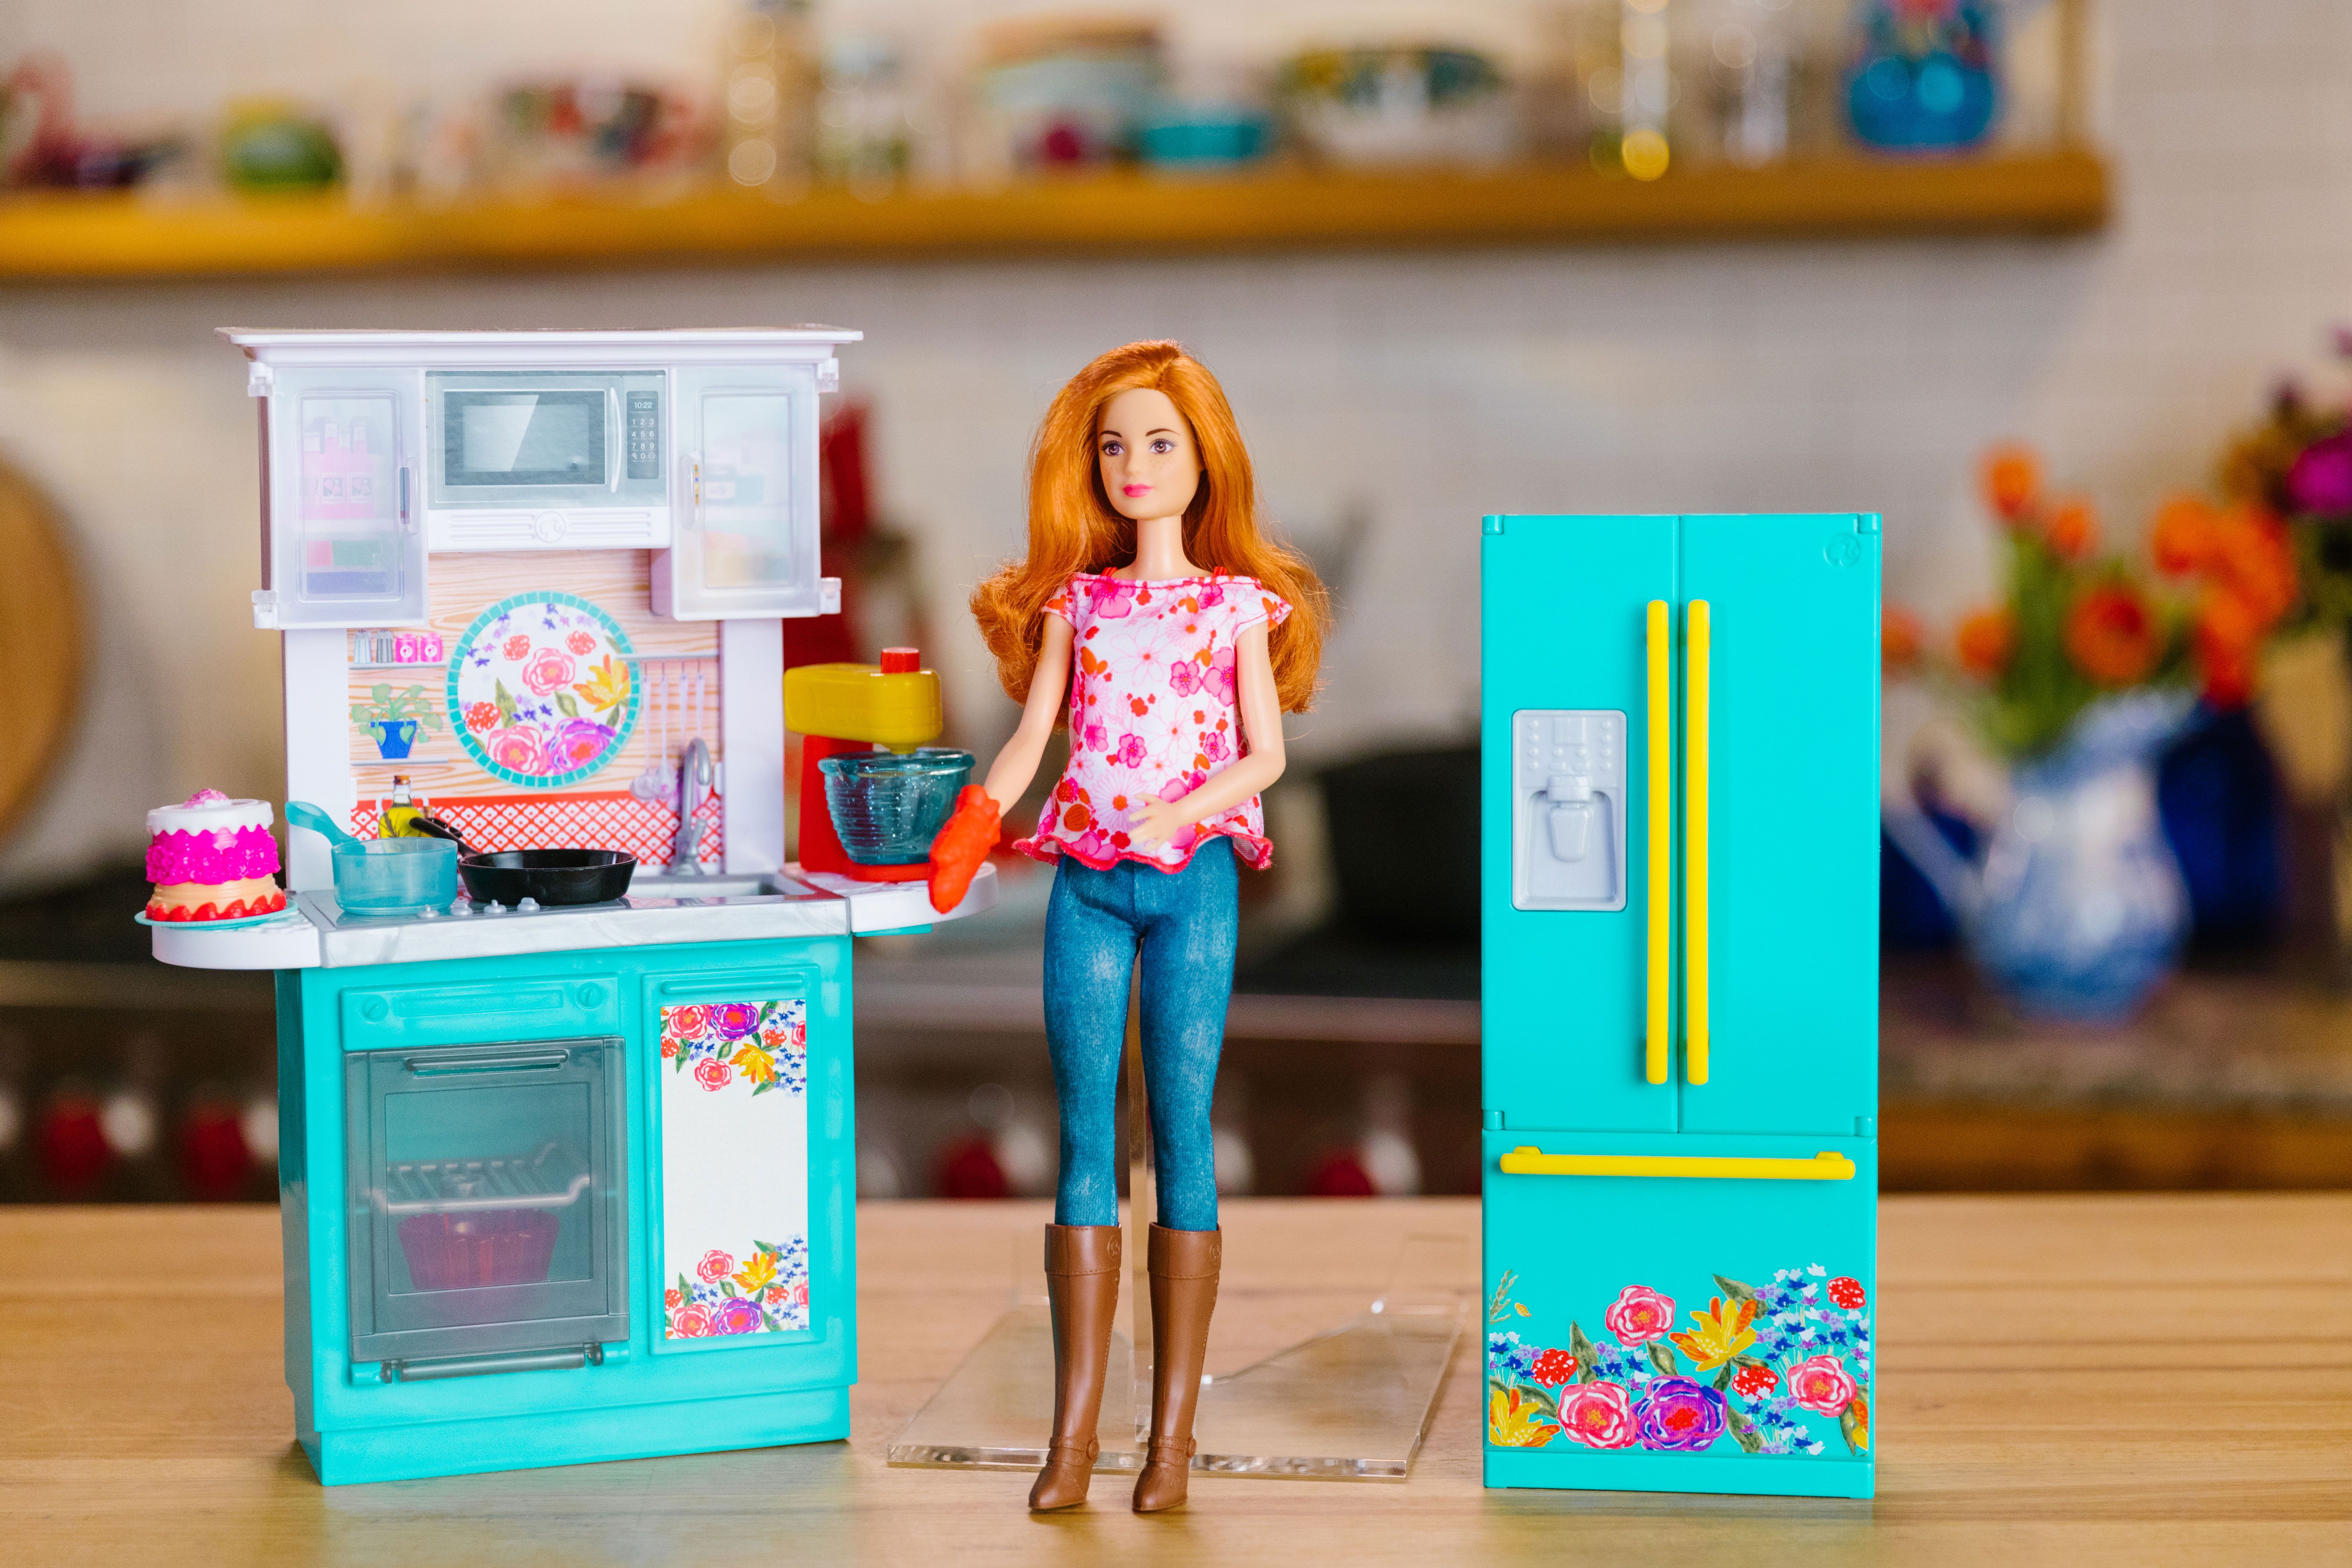 Barbie The Pioneer Woman Cooking Pasta Dishes Doll House Accessories 2018 Mattel for sale online 